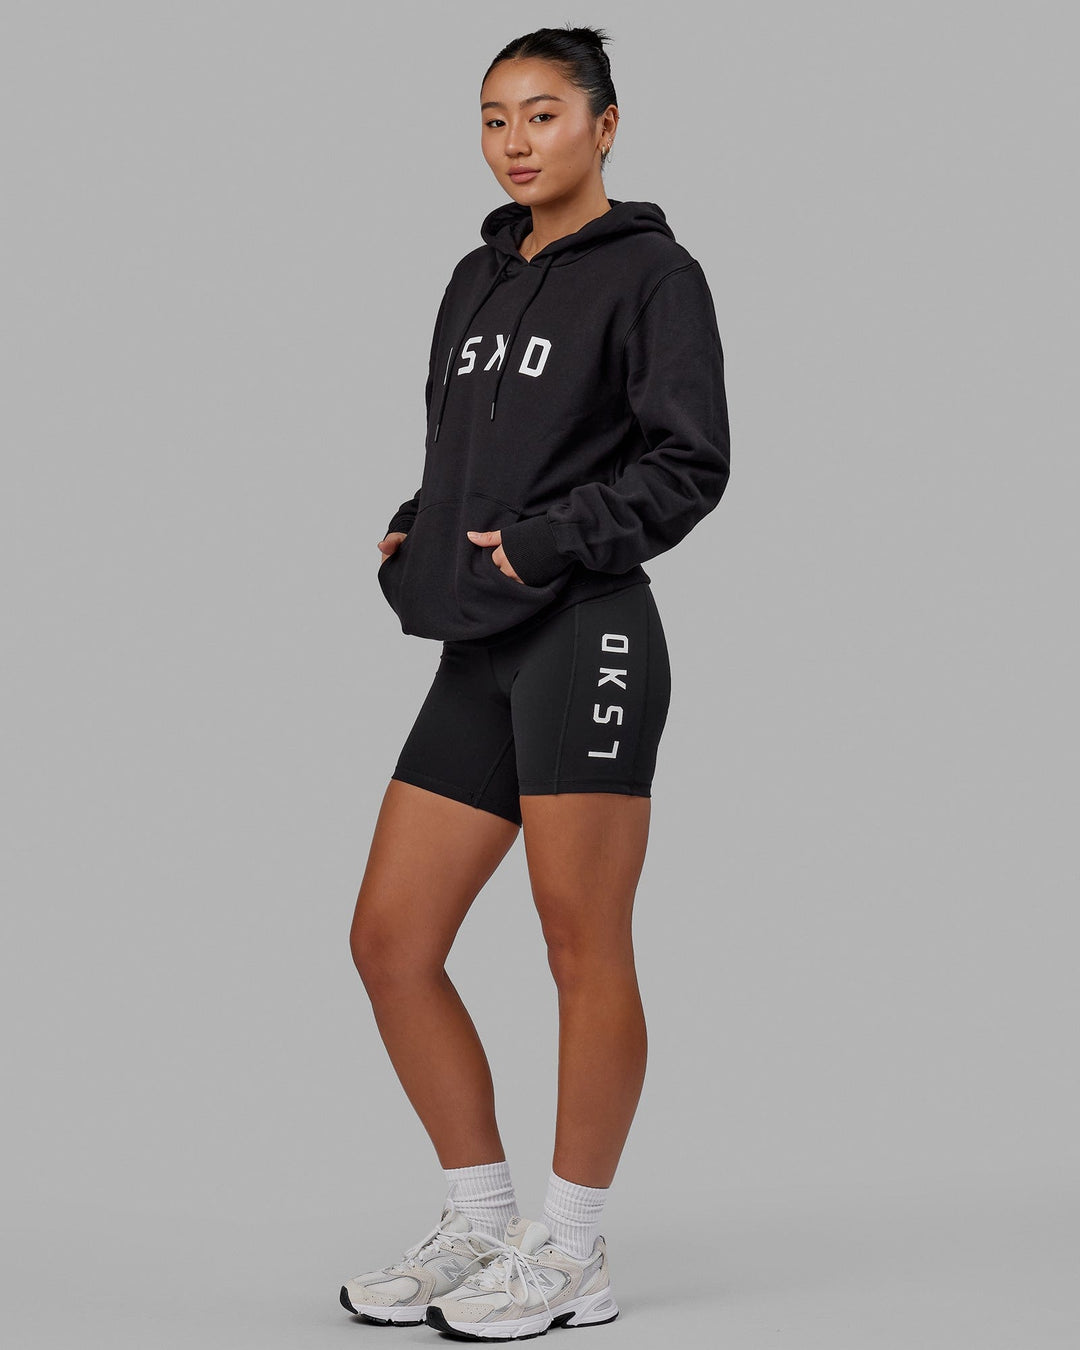 Woman wearing Structure Hoodie - Black-White